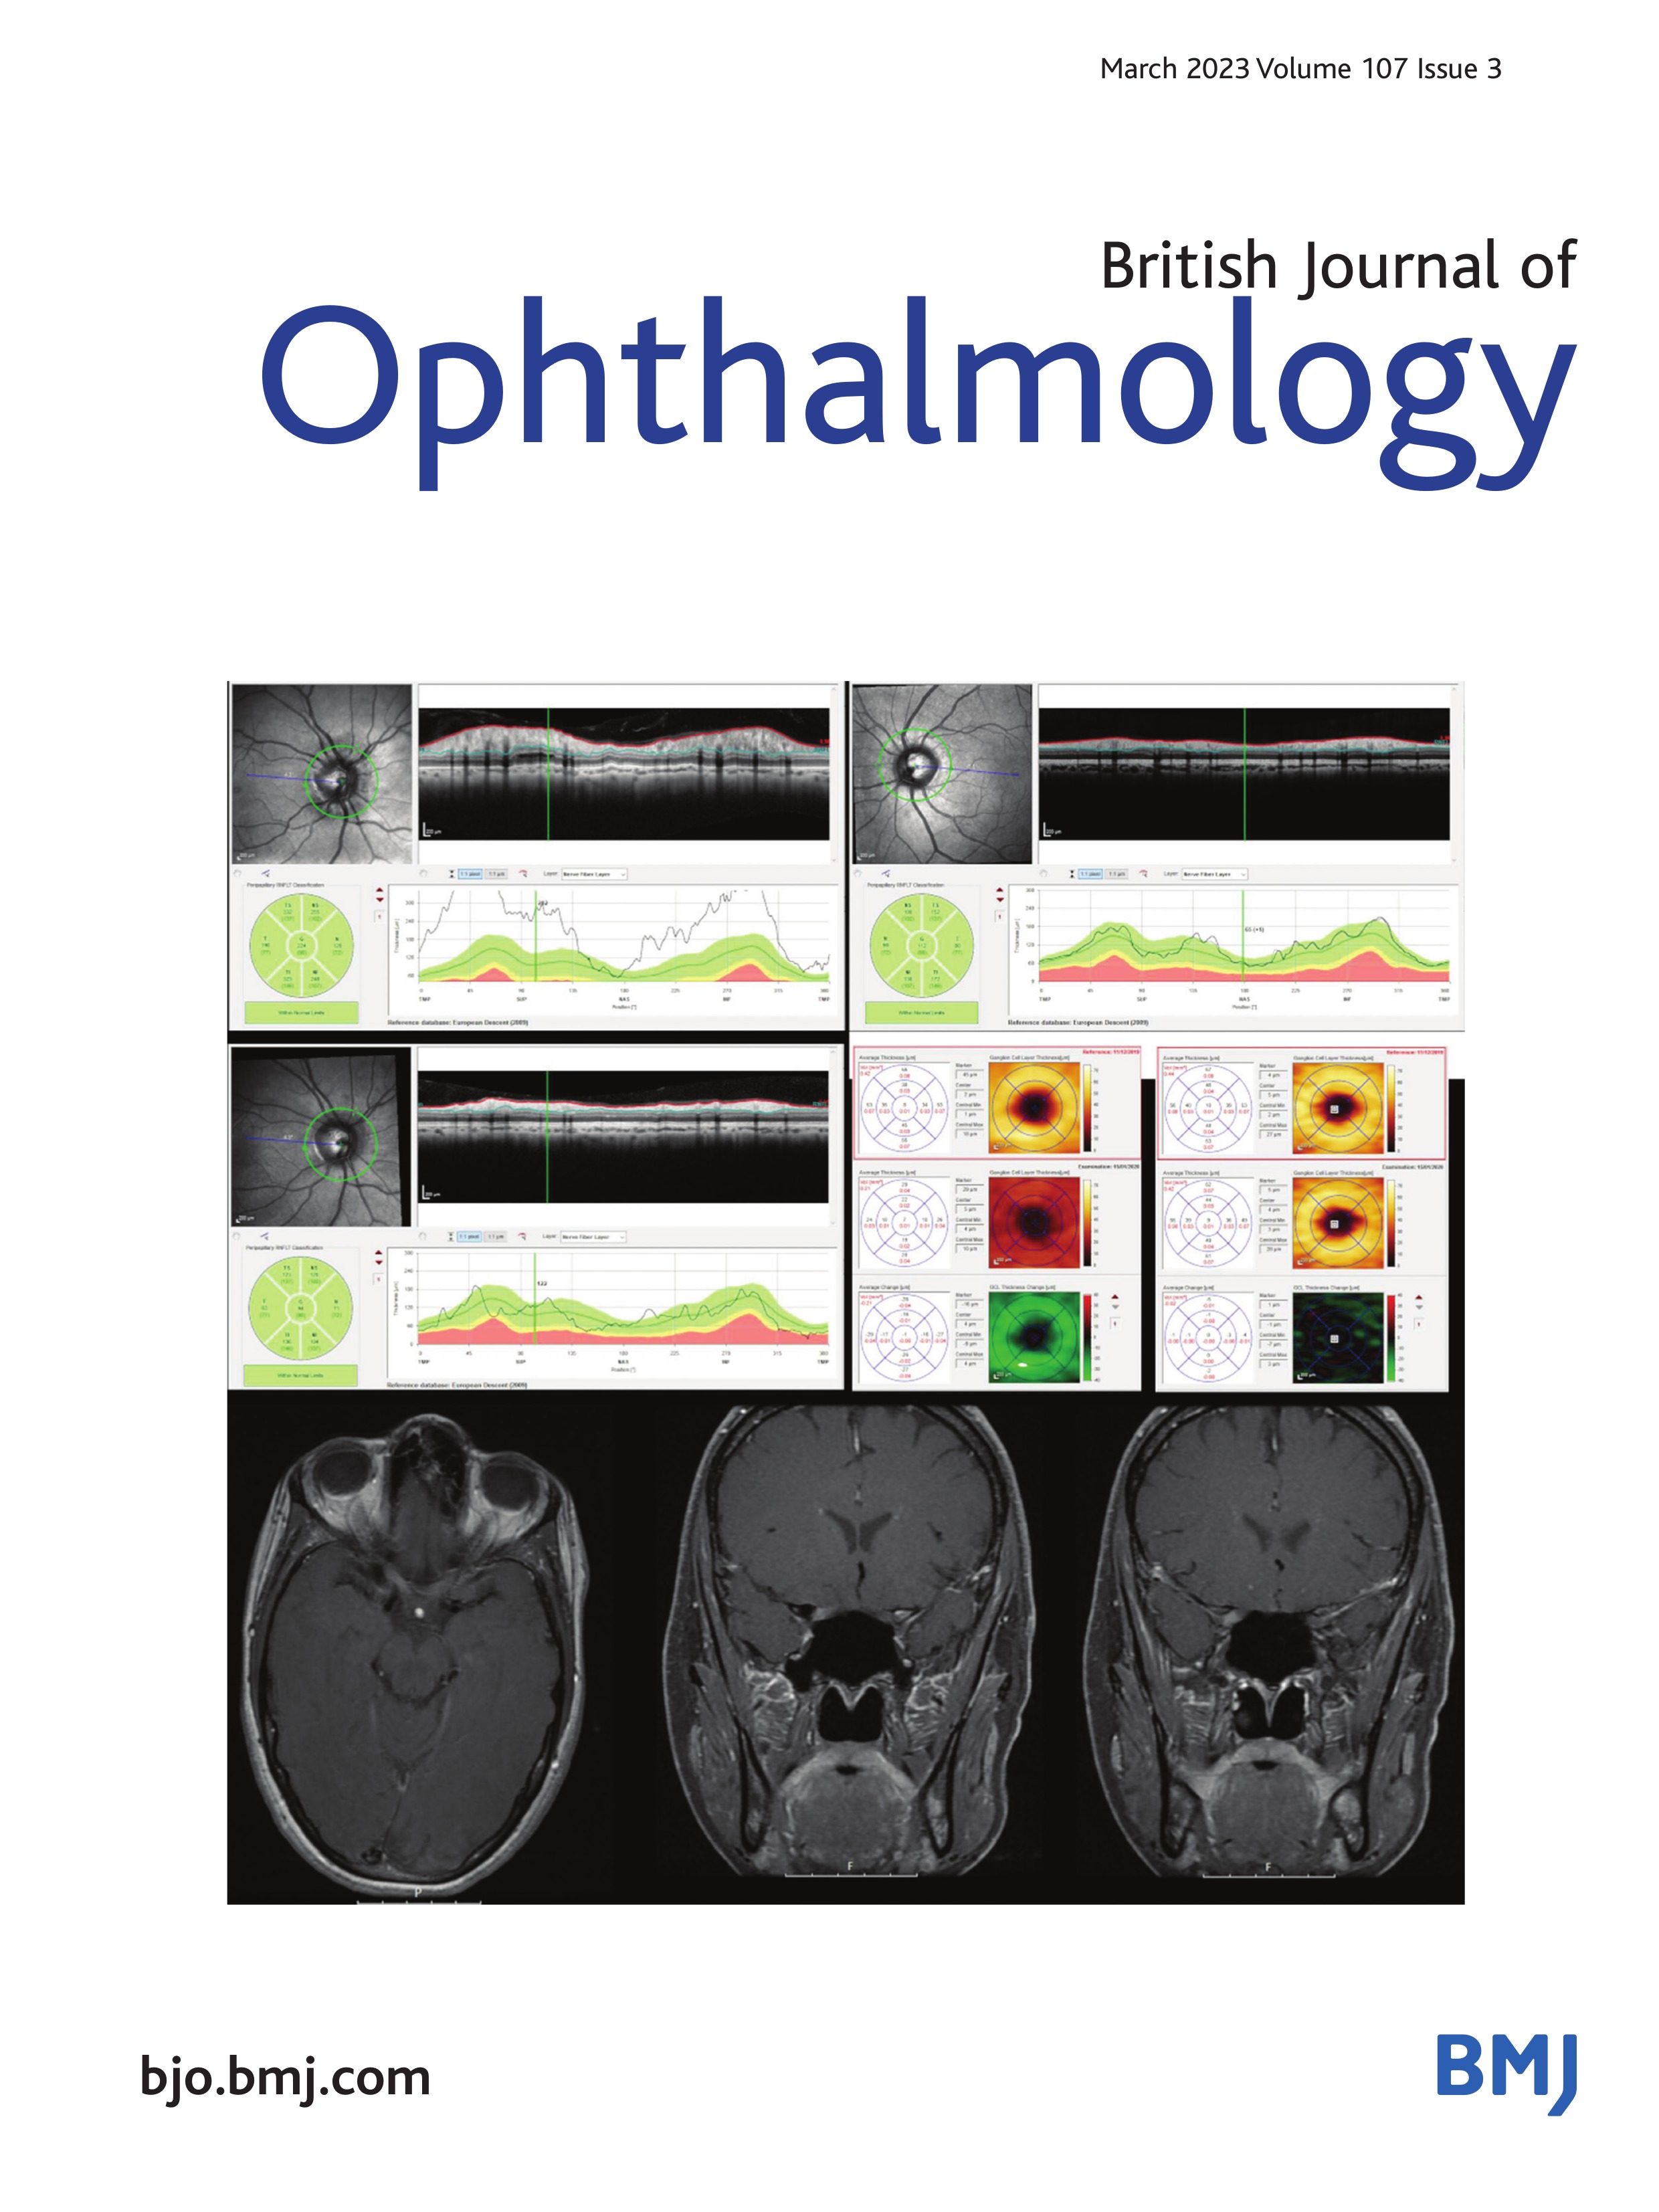 Evaluation of blood vessel network formation and visual field defect in optic disc melanocytoma